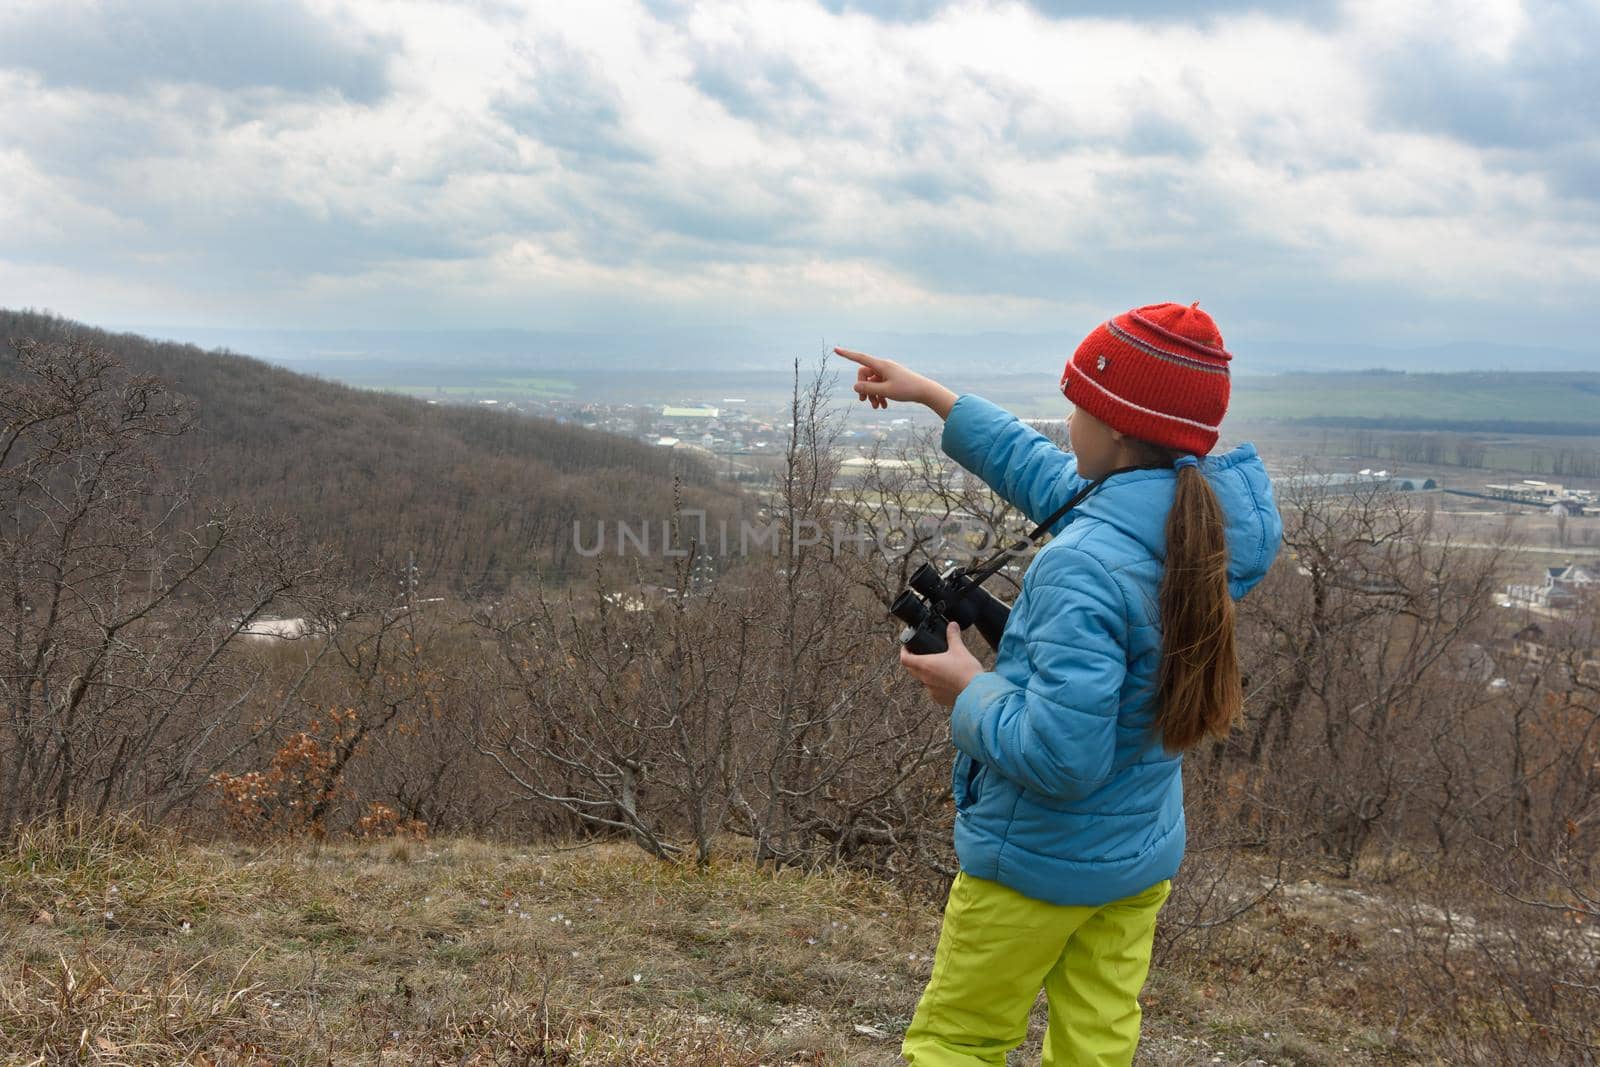 The girl saw something through binoculars, looking at the mountains and points there with her finger